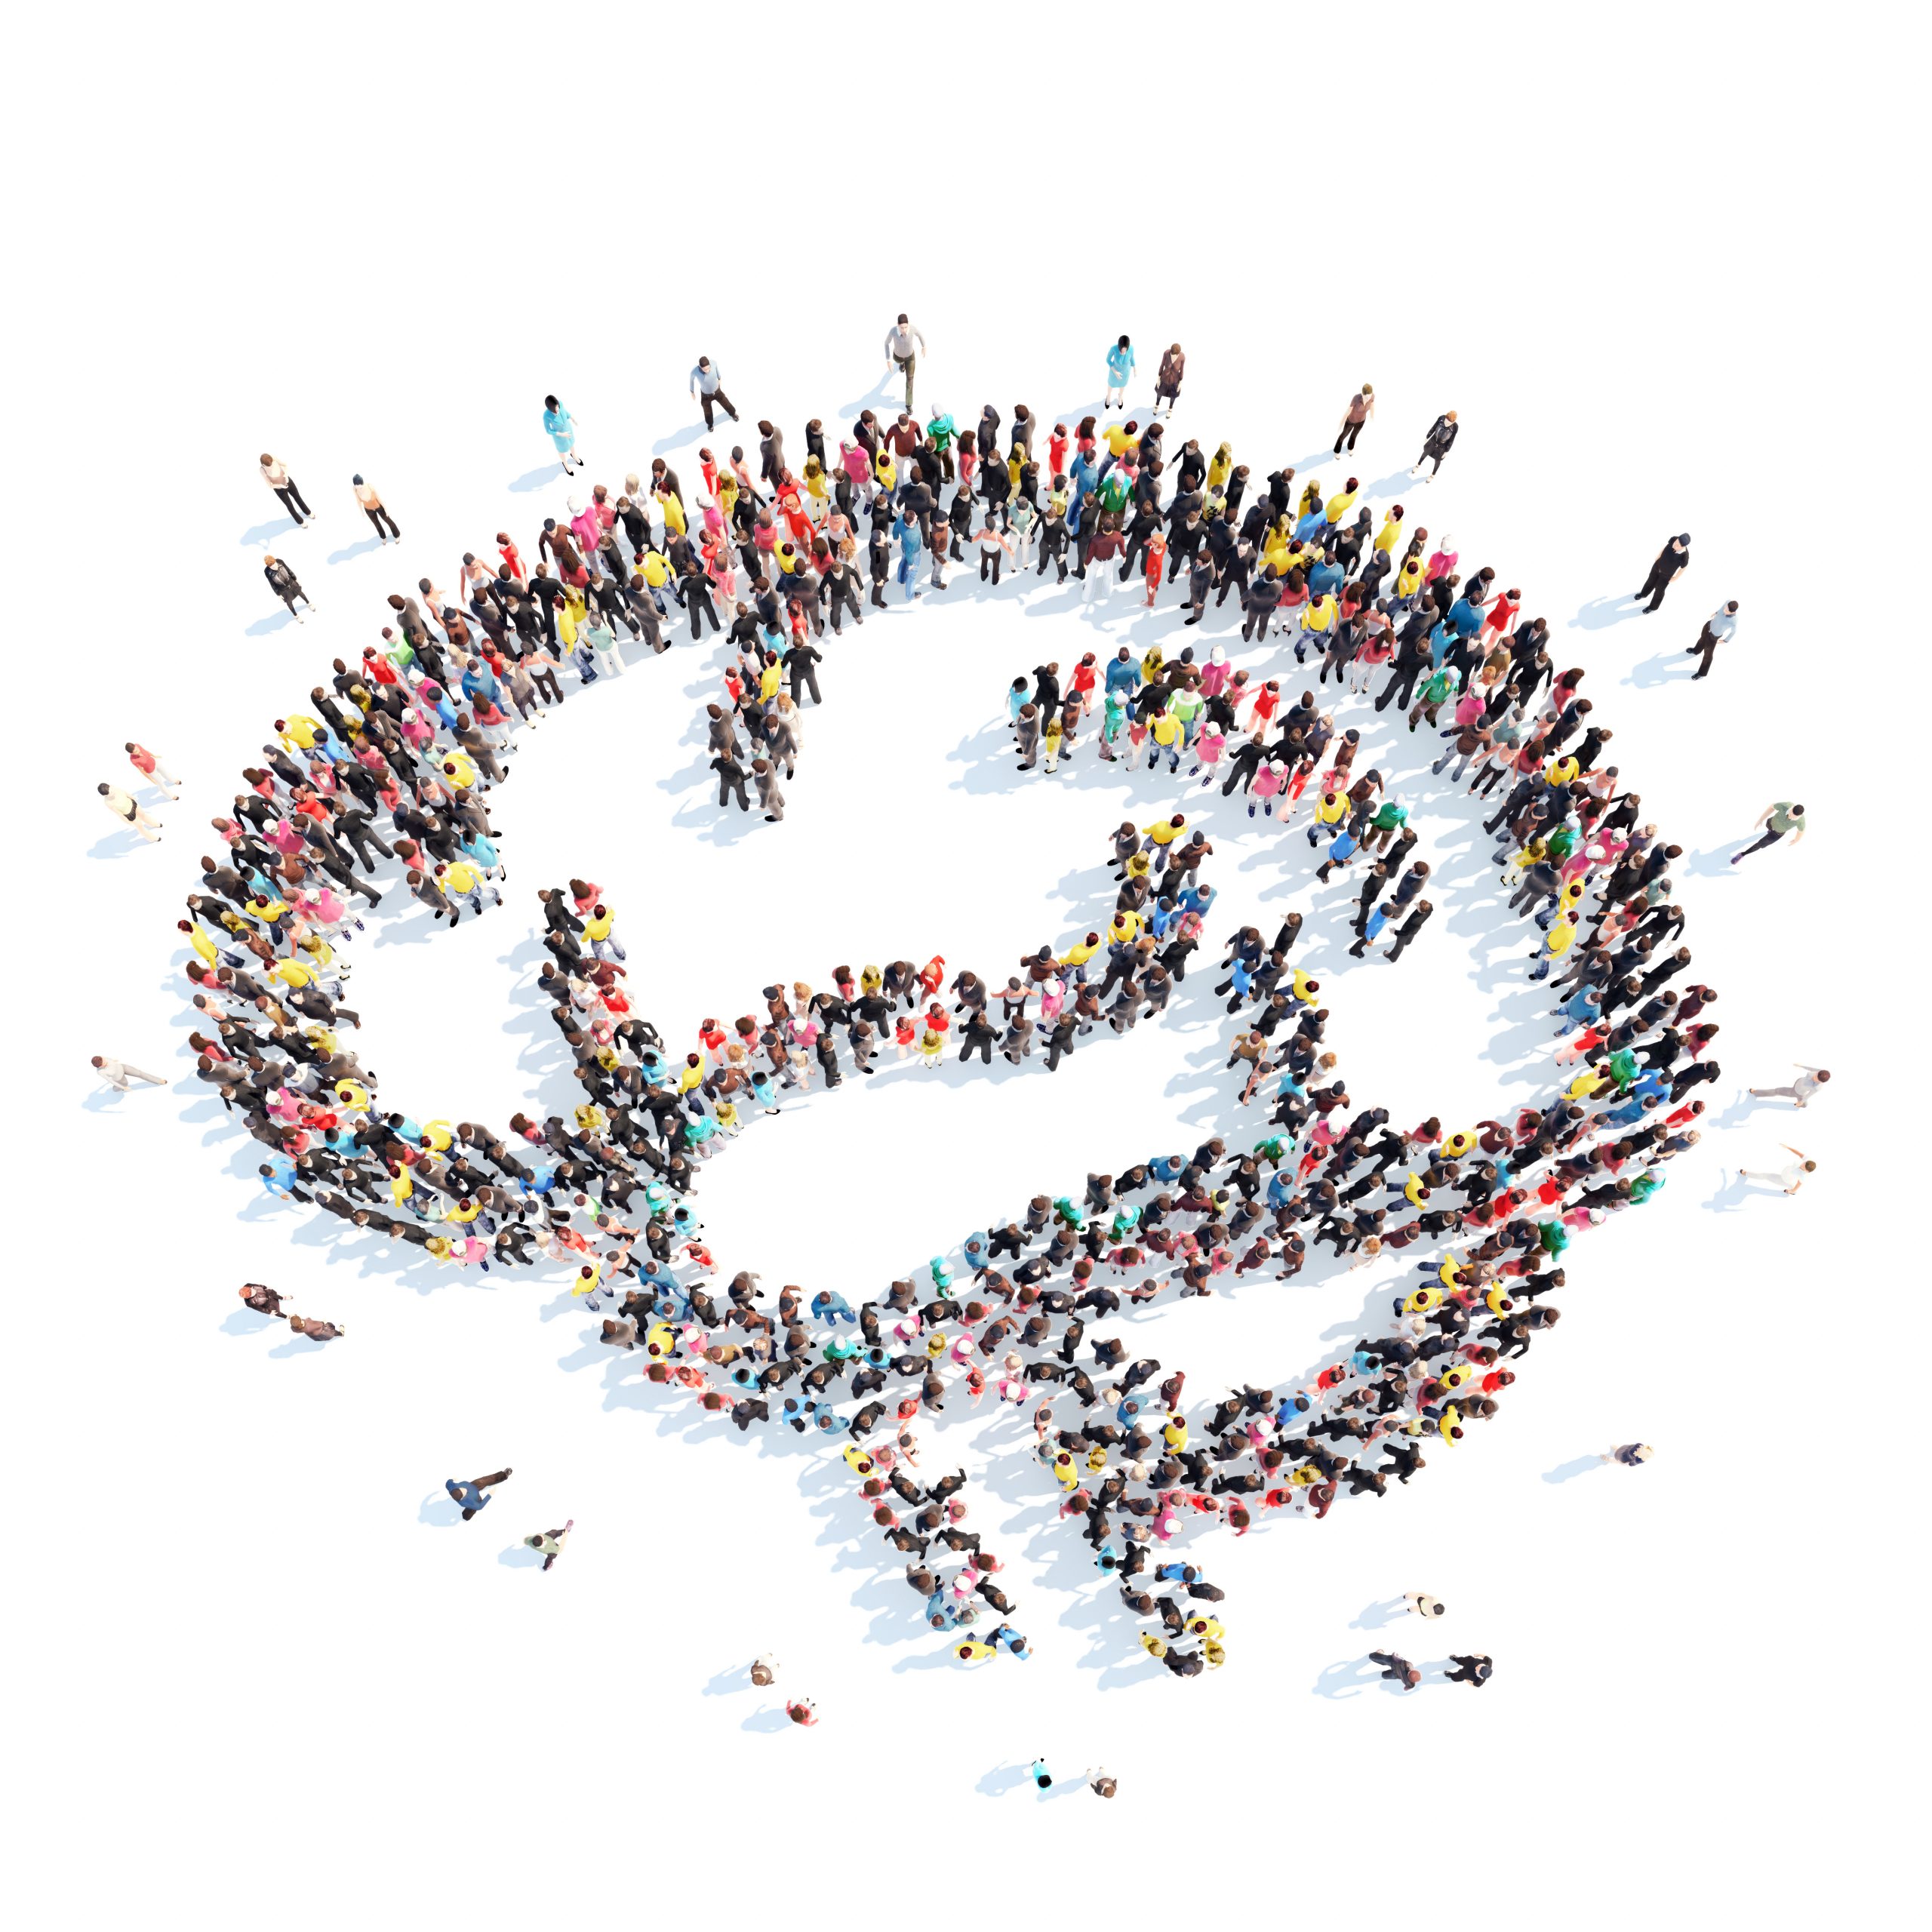 A large group of people in the shape of the brain. Isolated, white background.